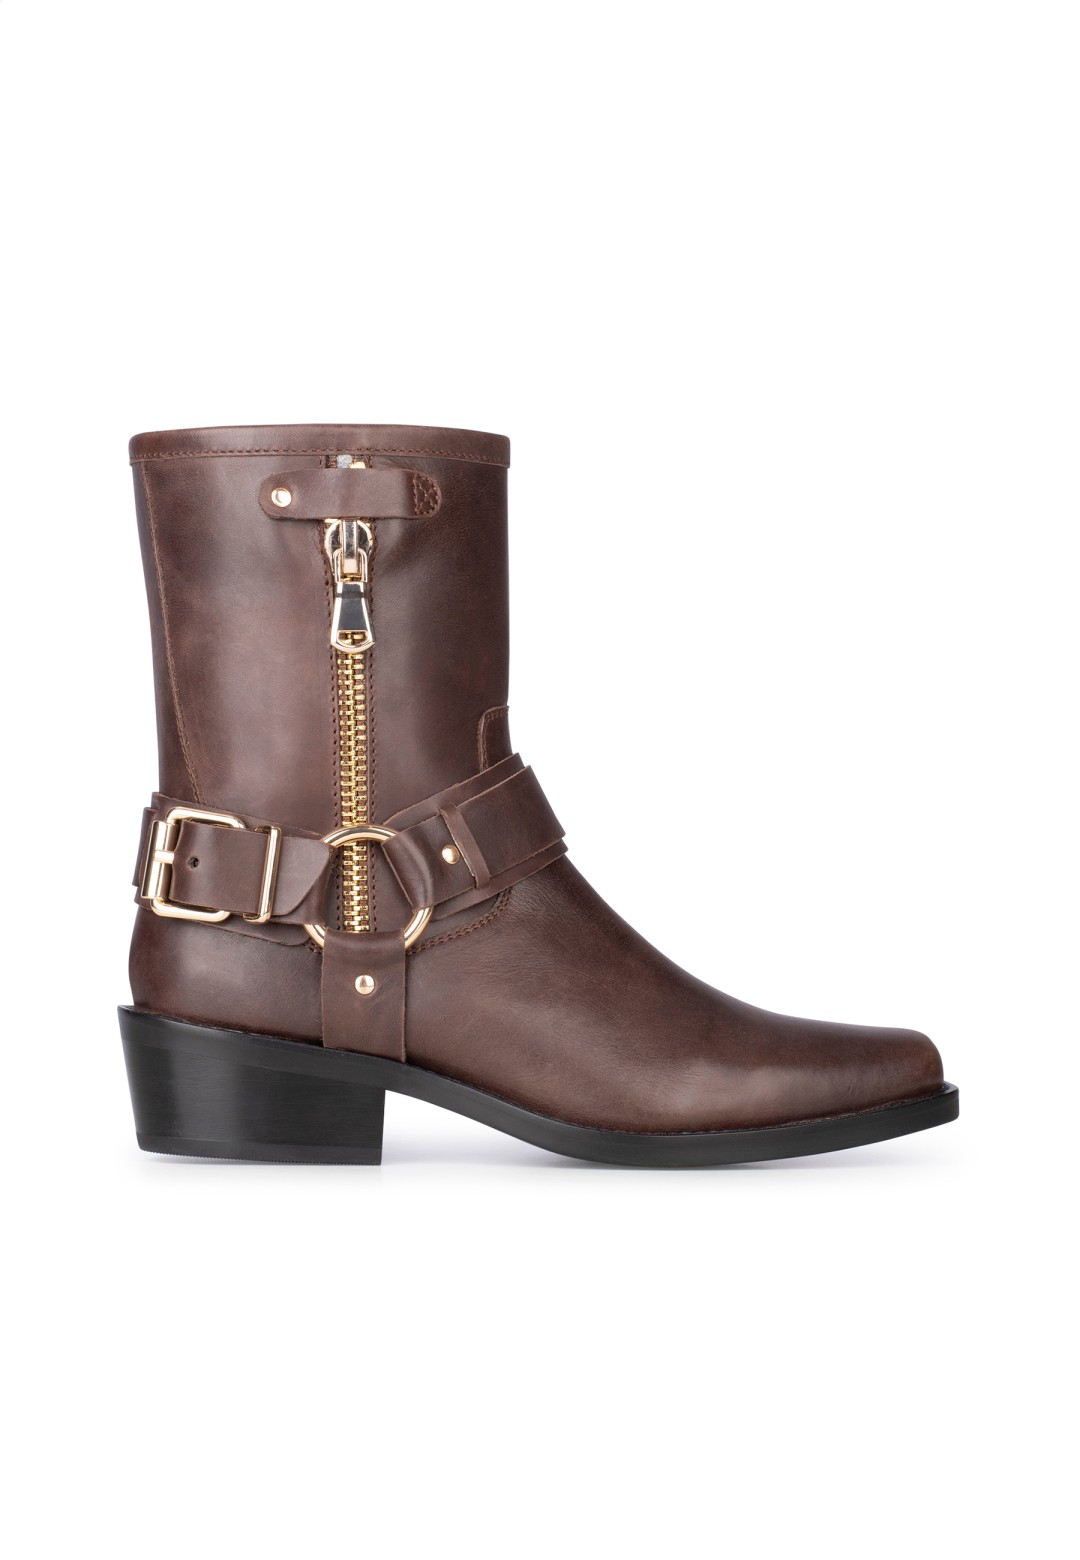 PS Poelman Ladies Sidonia ankle boots | The Official POELMAN Webshop